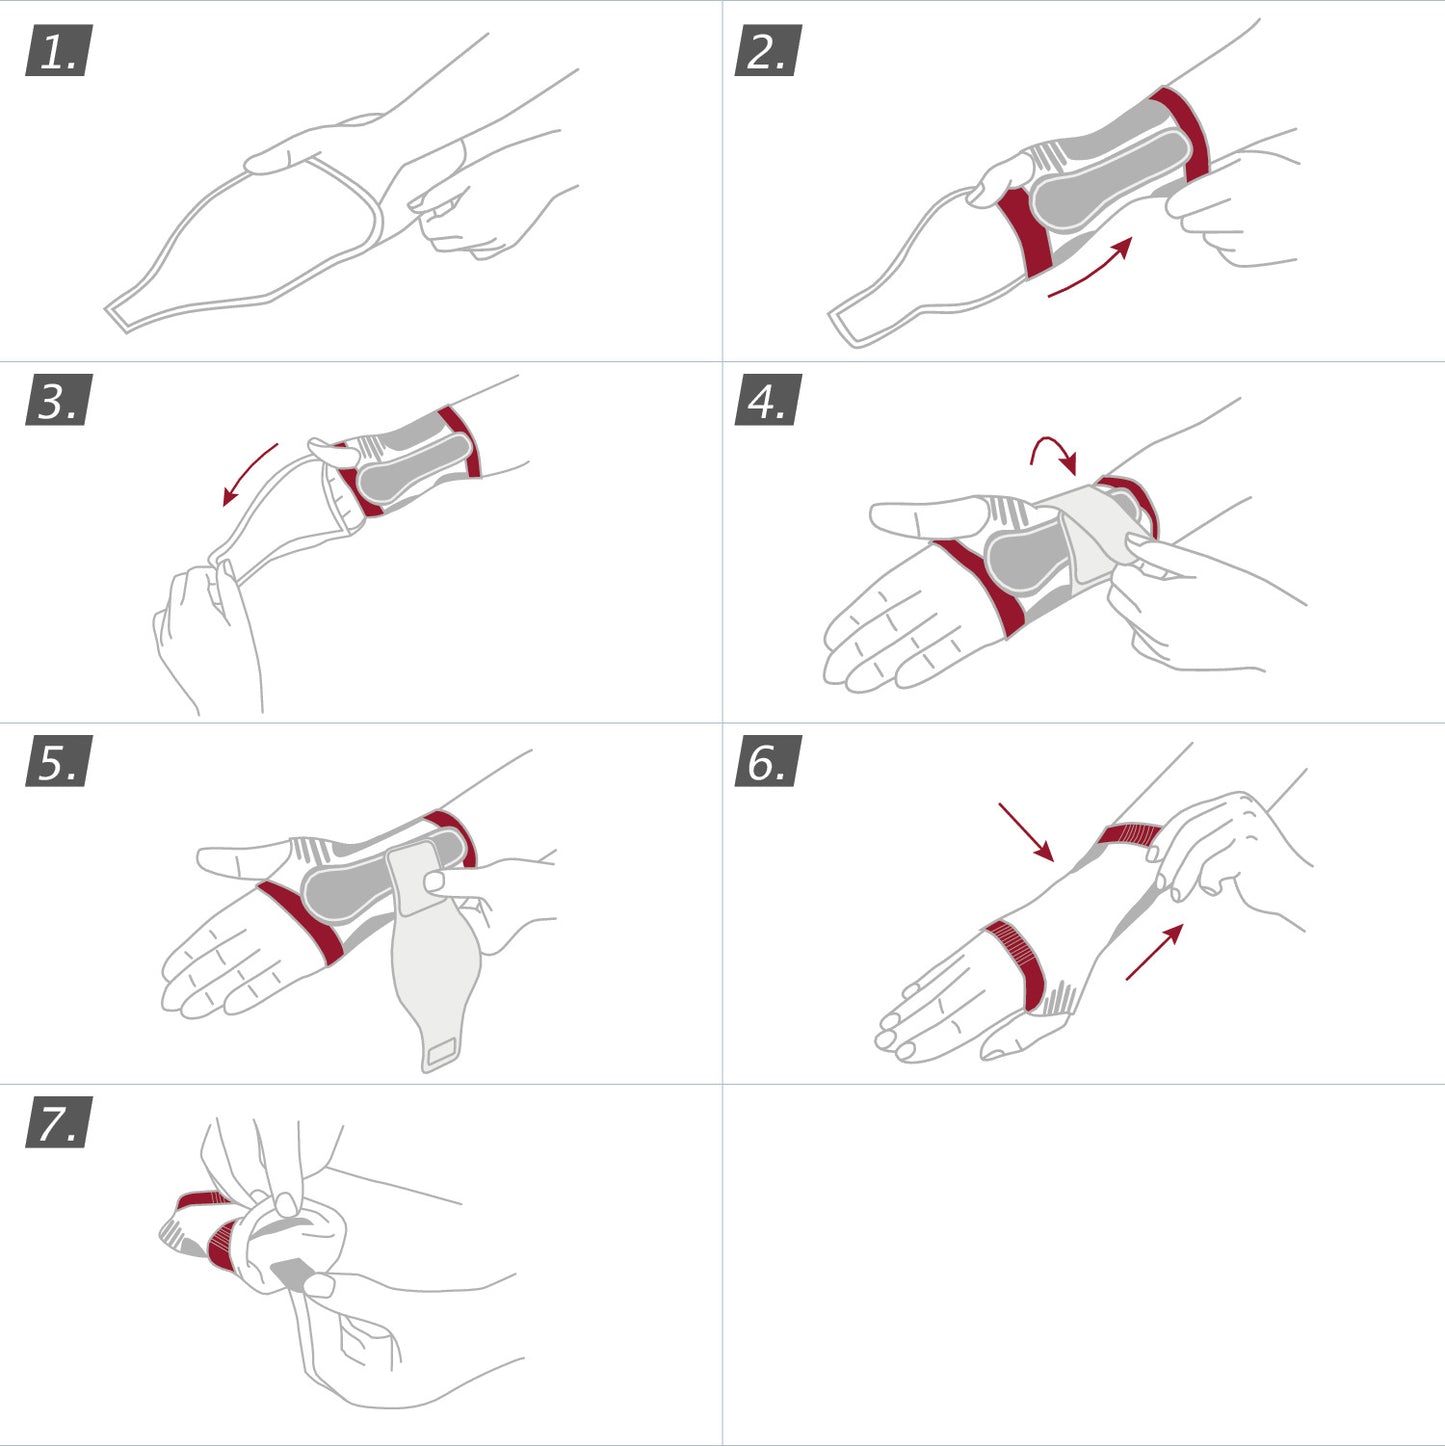 How to wear Jobst Actimove Professional Line ManuMotion Wrist Support